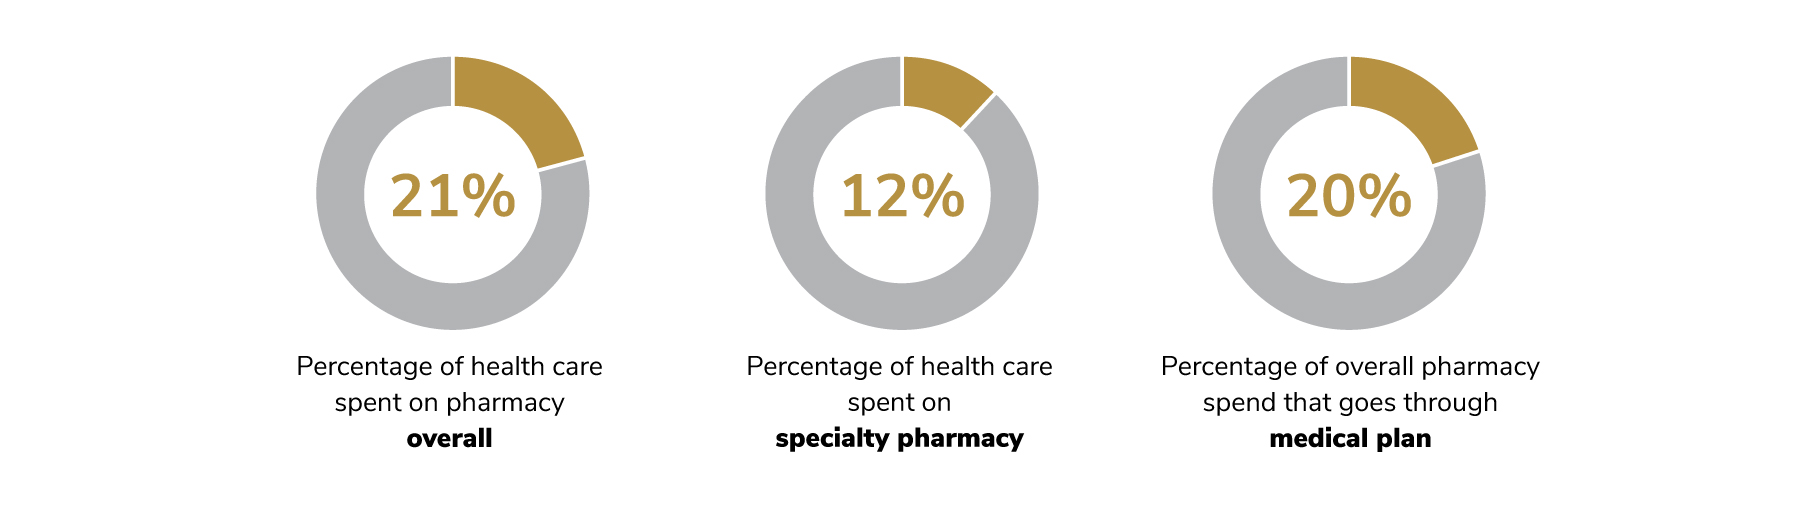 21% of health care costs is spent on pharmacy overall, 12% is spent on specialty pharmacy and 20% of pharmacy spend goes through the medical plan.